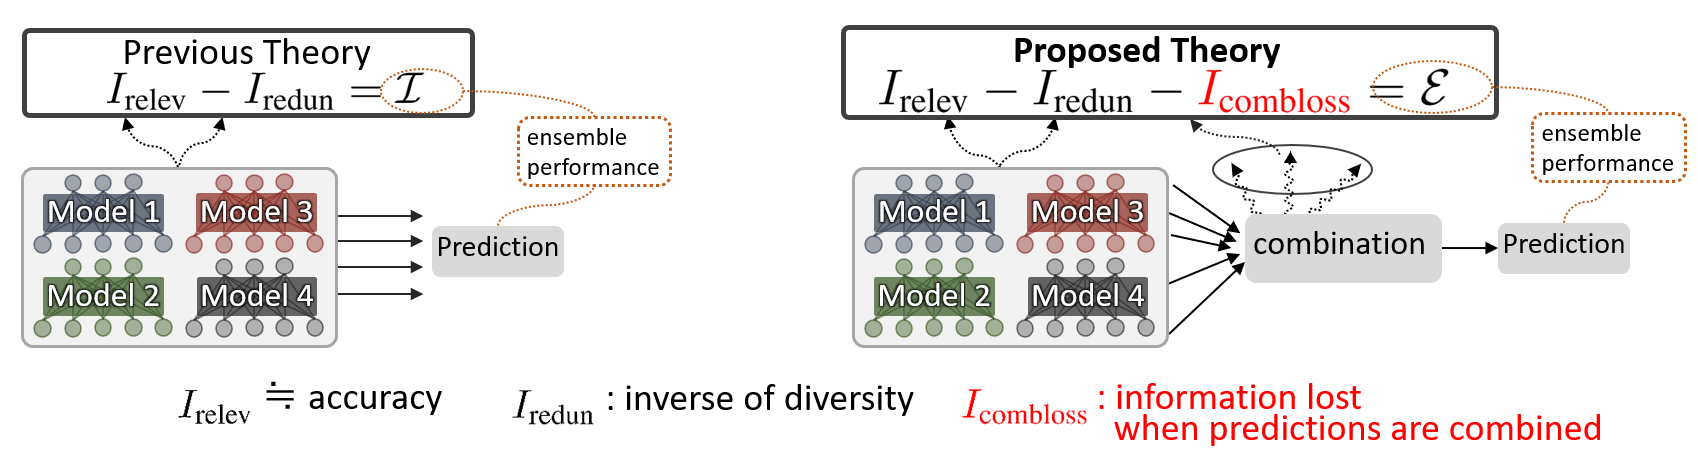 Figure 1. Comparing the previous framework [2][3] (left) and our proposition [1] (right).​